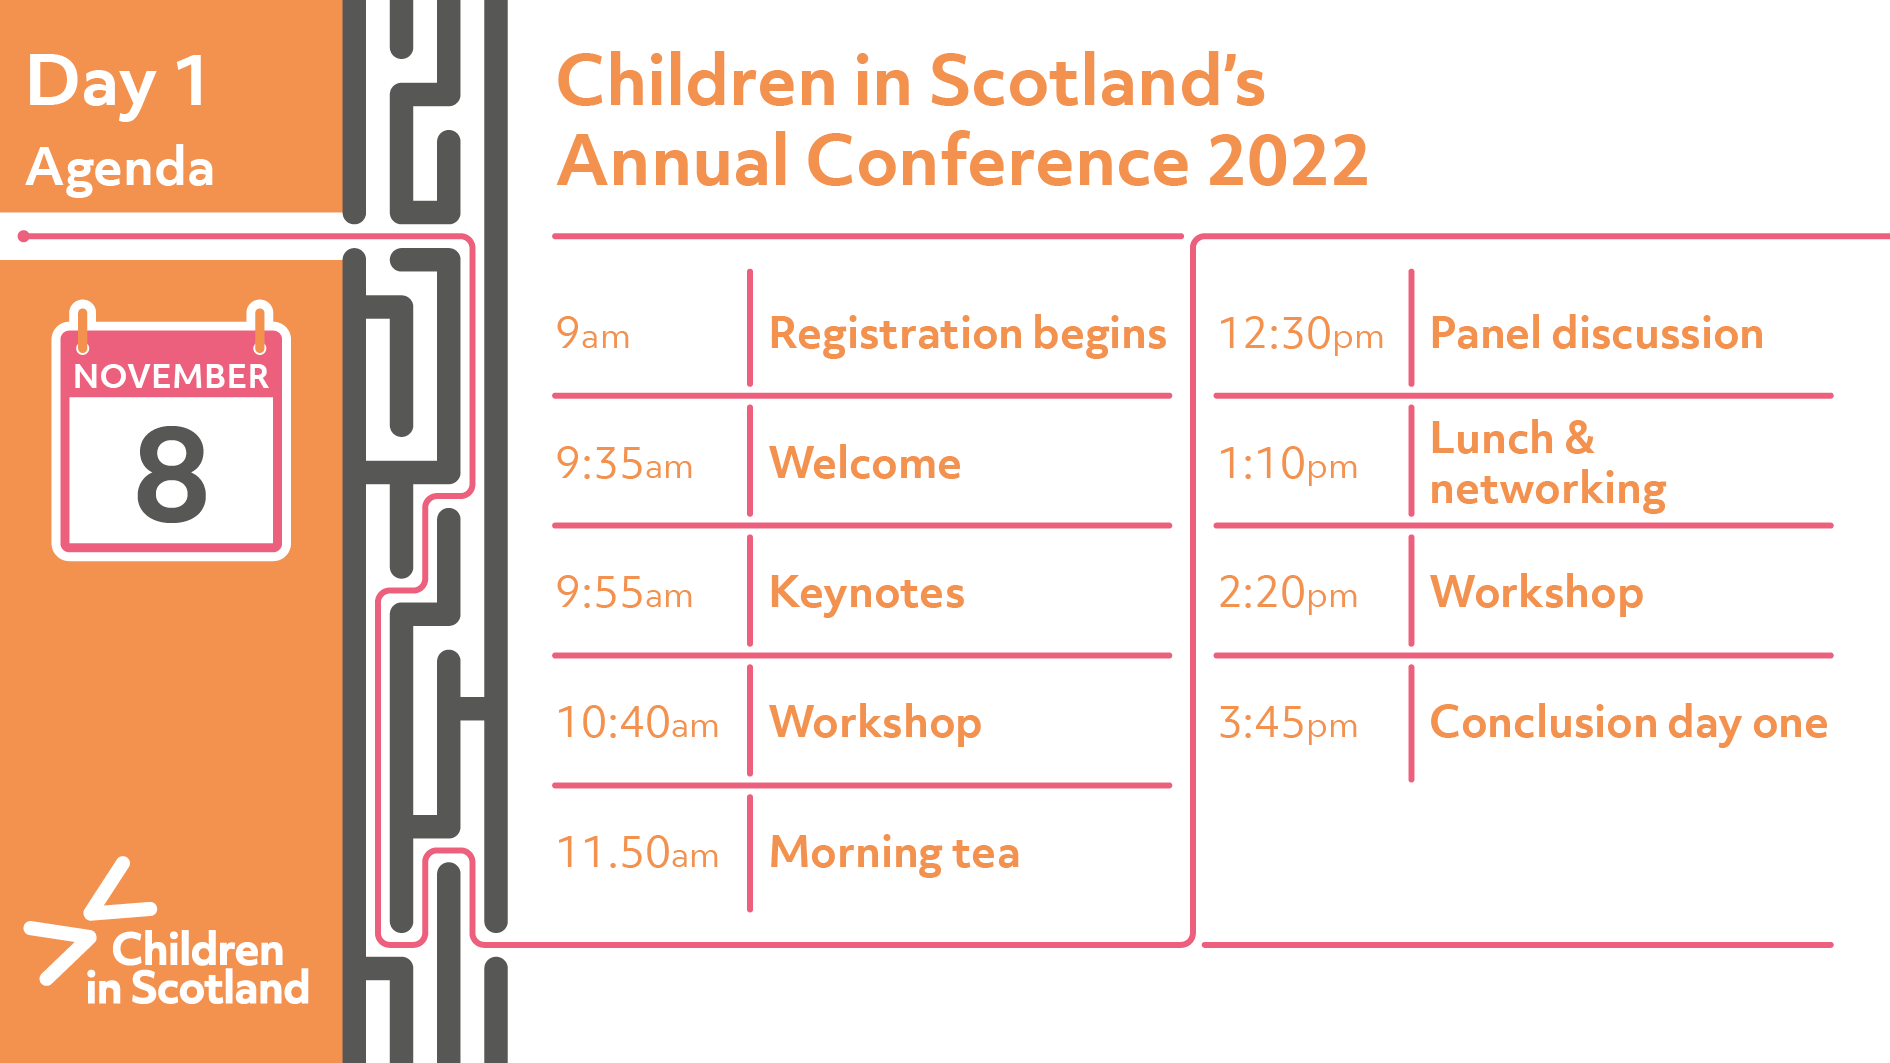 Annual Conference agenda day 1. 9am registration. 9:35am welcome. 9:55am keynotes. 10:40am workshop. 11:50am morning tea. 12:30pm panel discussion. 1:10pm lunch & networking. 2:20pm workshop. 3:45 conclusion day 1